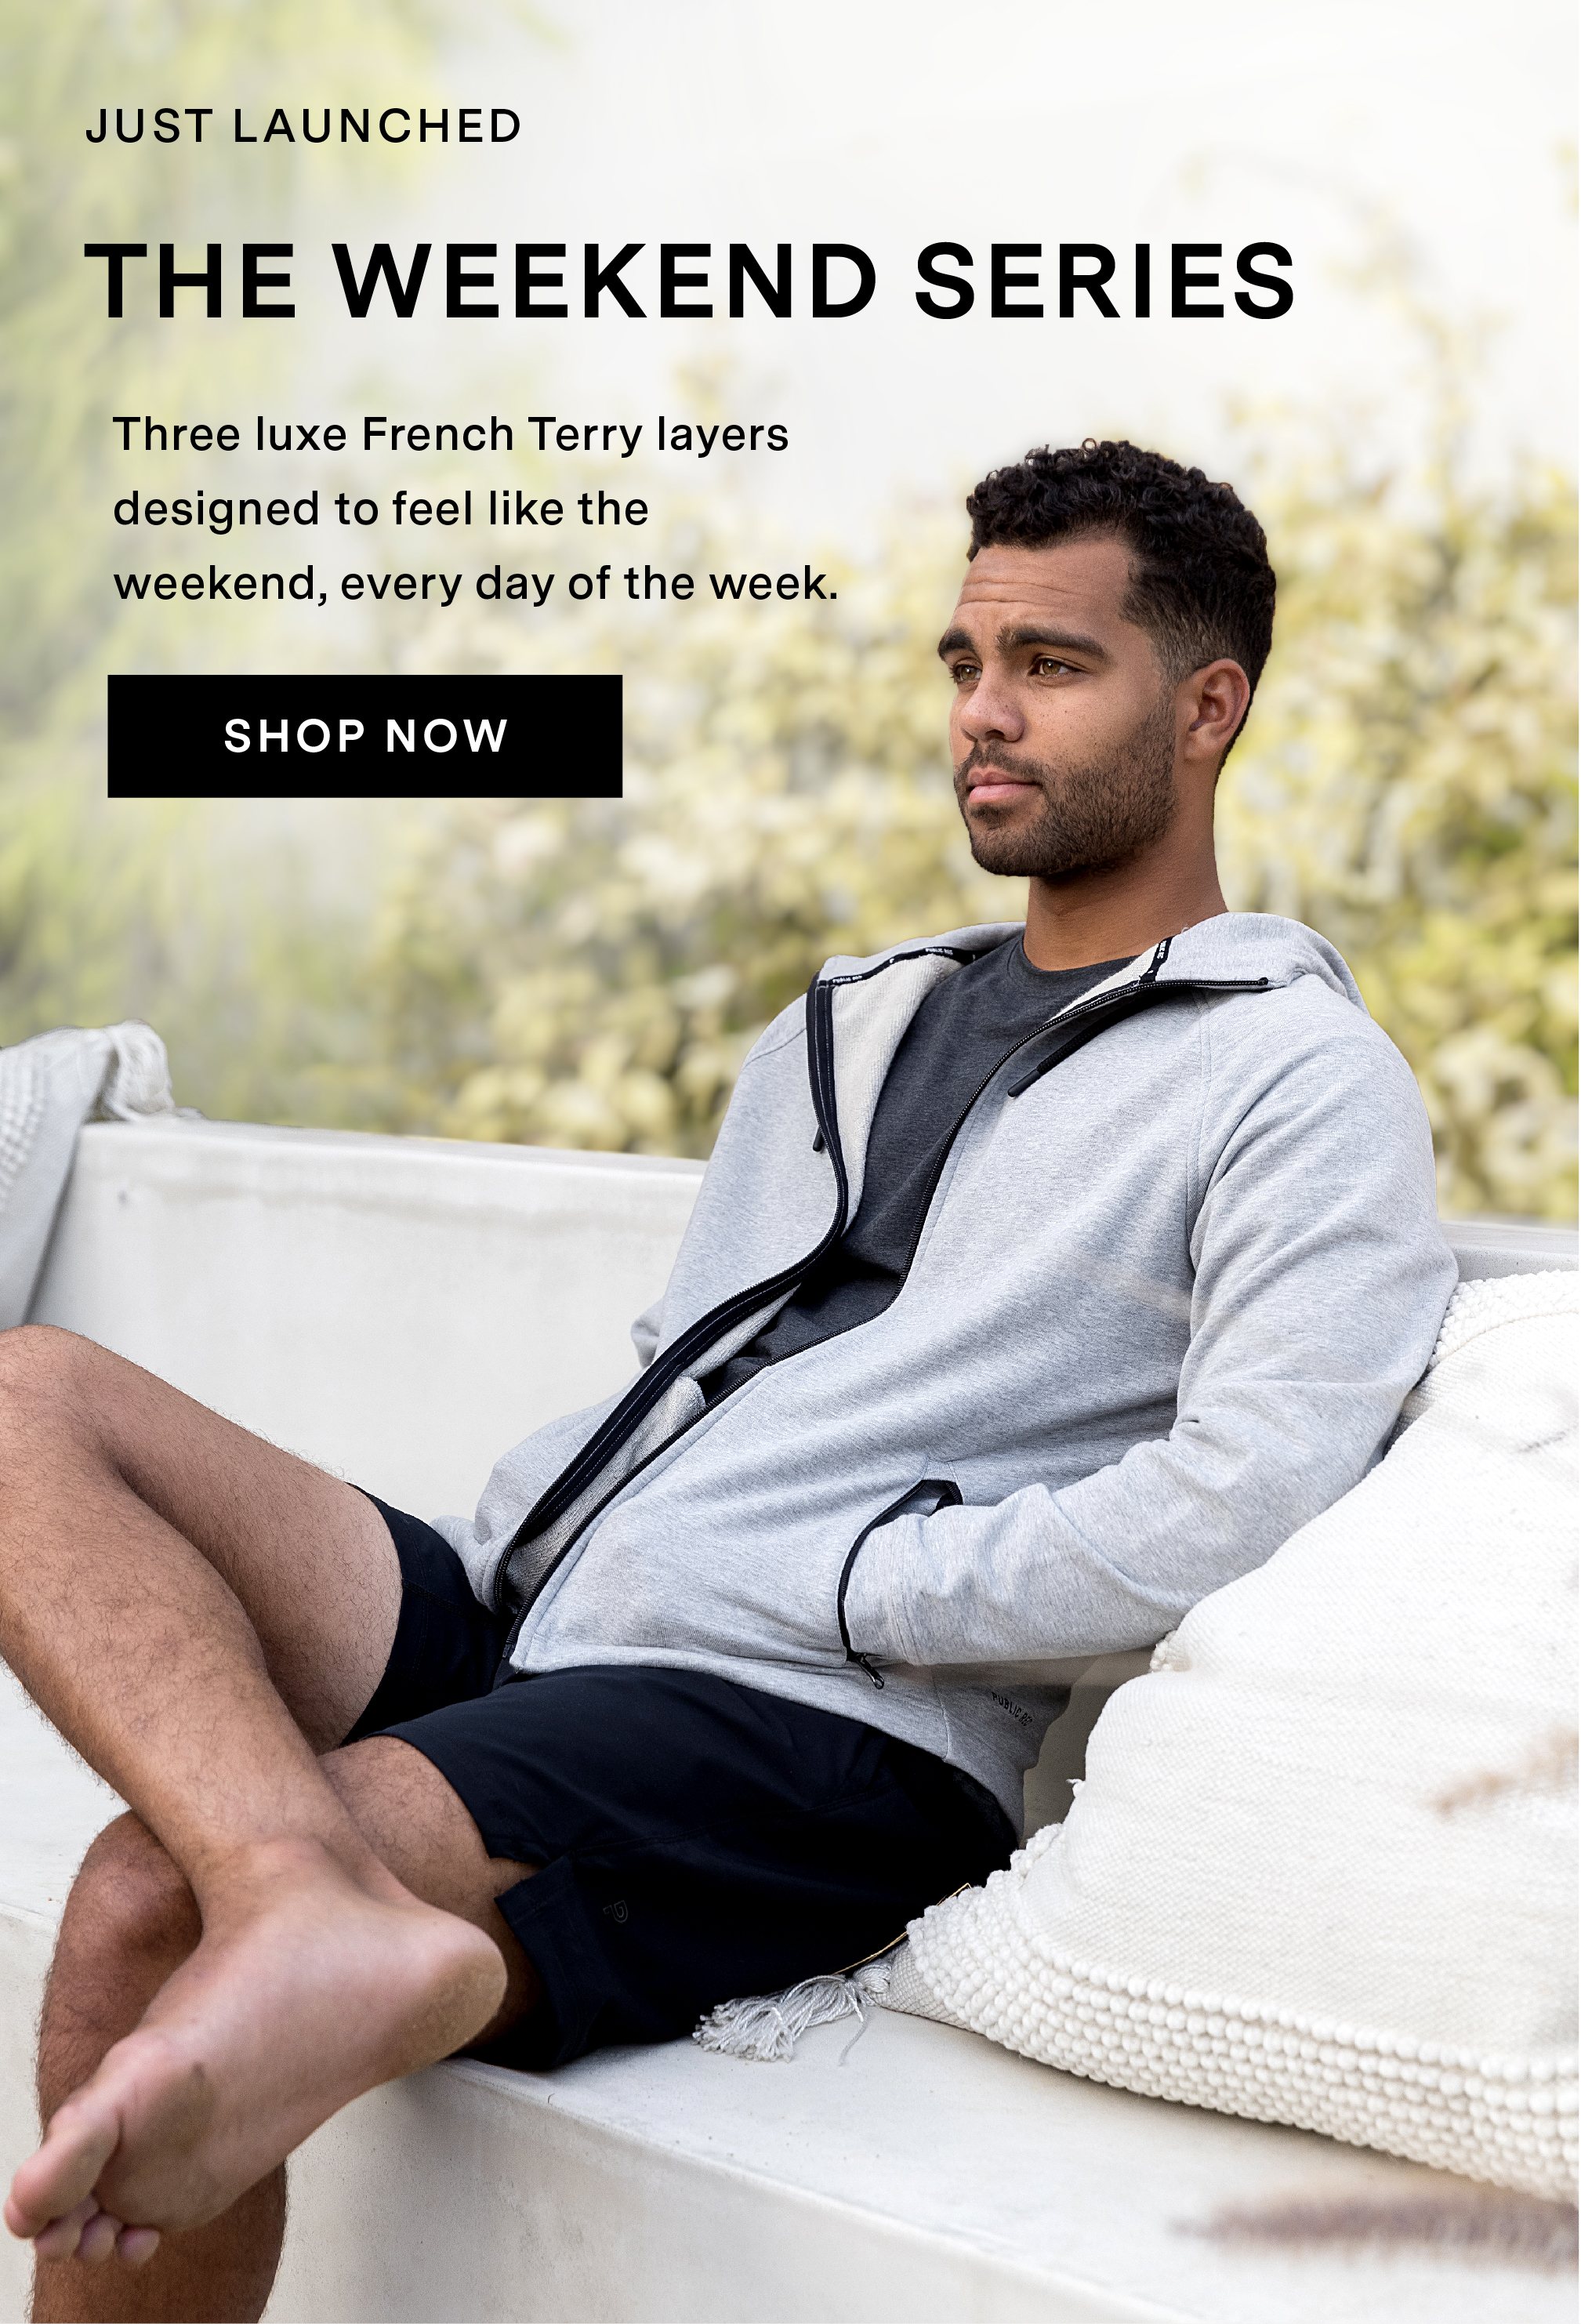 JUST LAUNCHED: THE WEEKEND SERIES. Three luxe French Terry layers designed to feel like the 	weekend, every day of the week.  SHOP NOW.